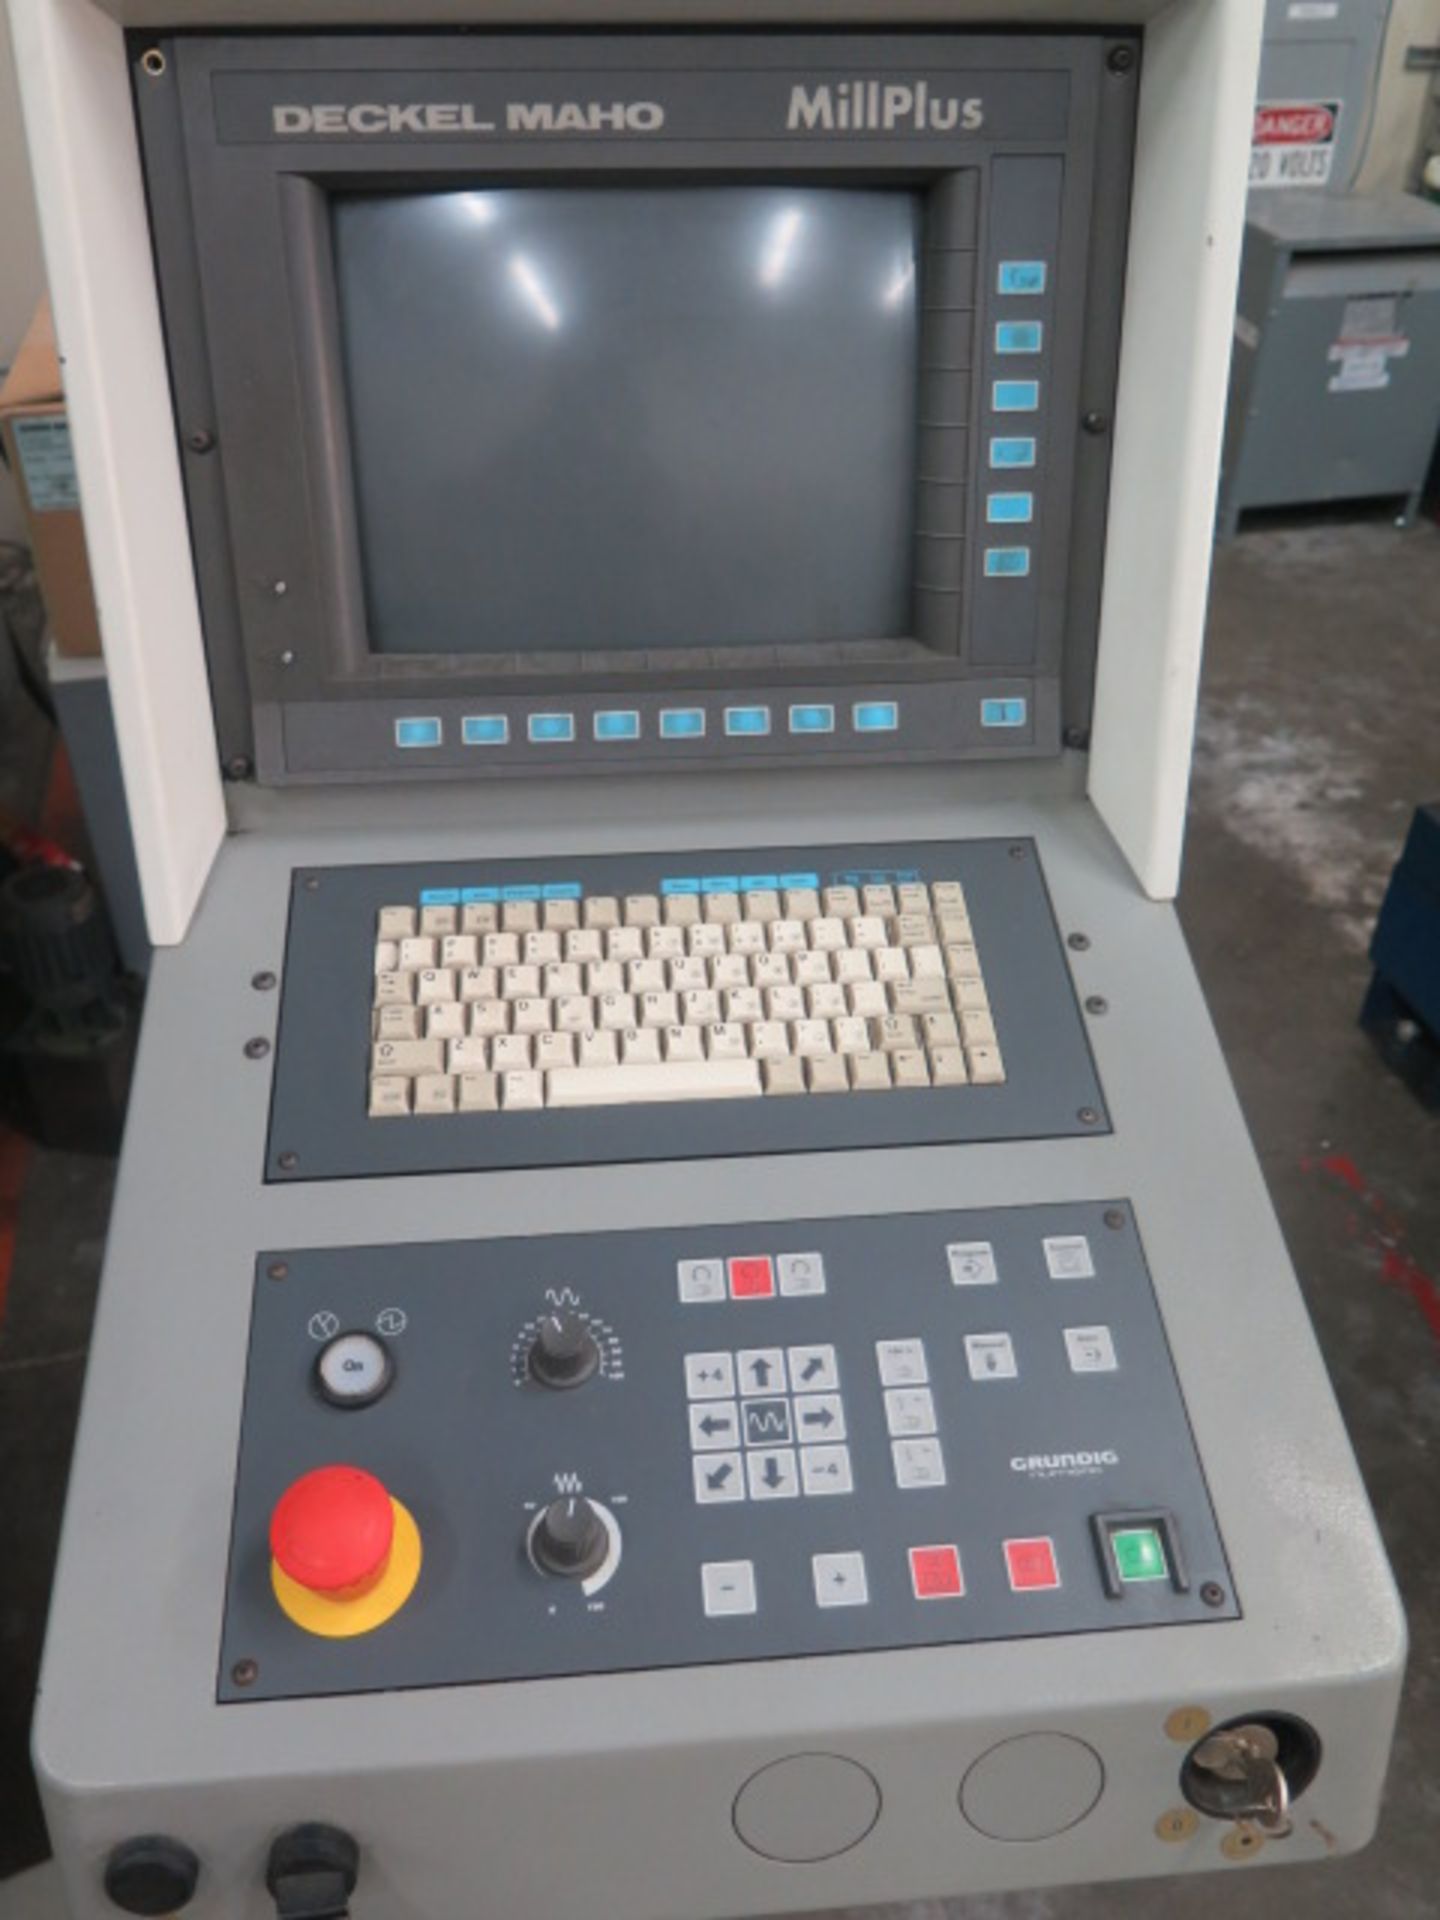 Deckel MAHO DMU50V 4-Axis CNC Vertical Machining Center (NEEDS WORK) s/n 054820 w/ Deckel Mill - Image 10 of 13